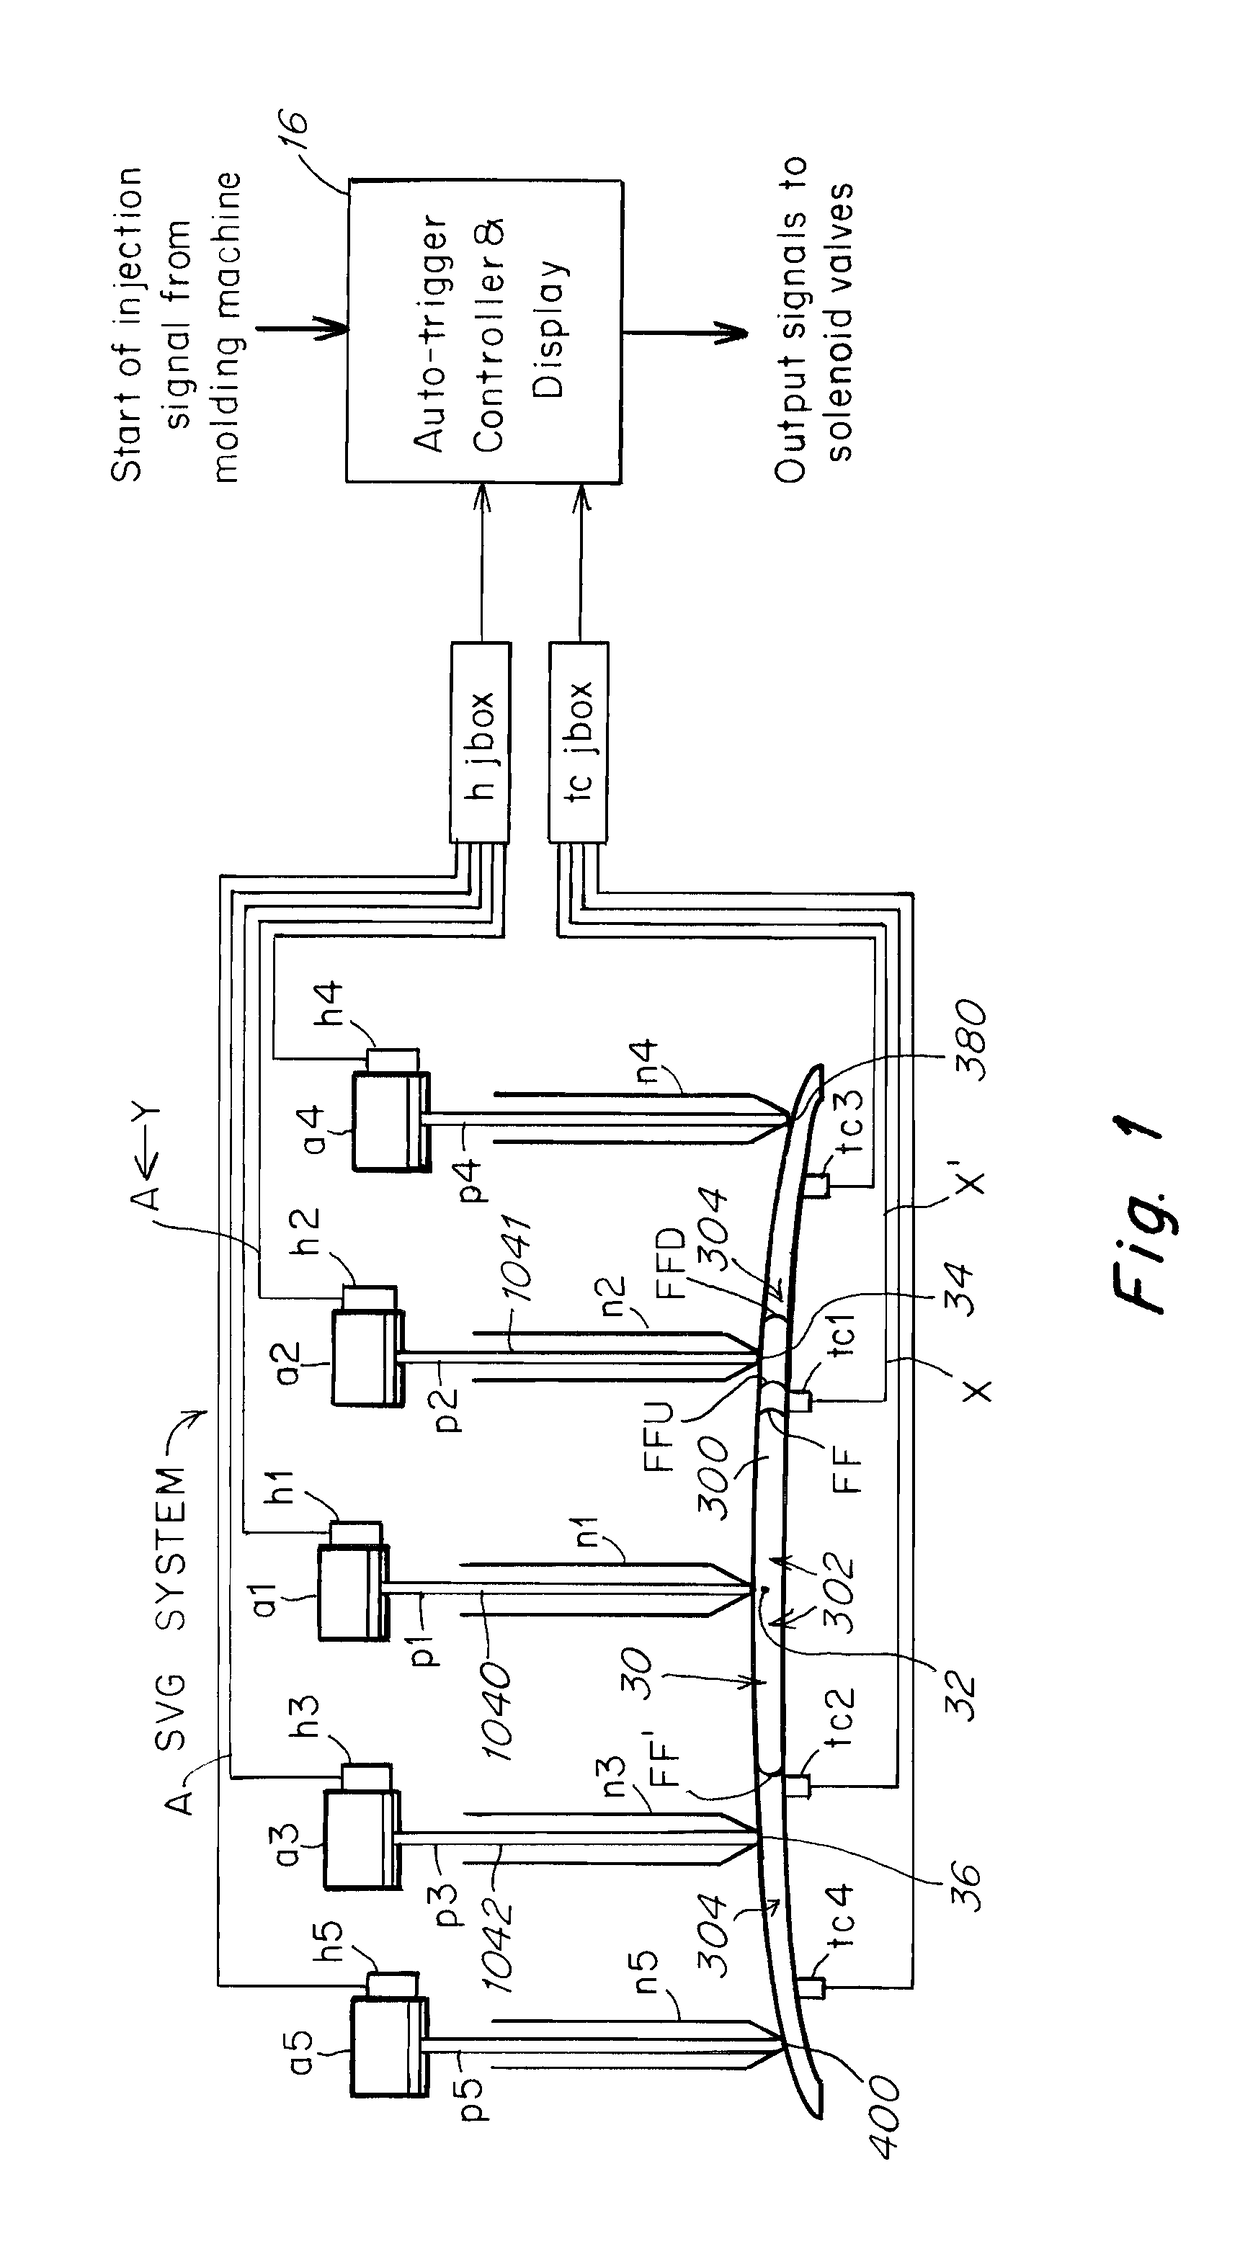 Large part injection mold apparatus and process